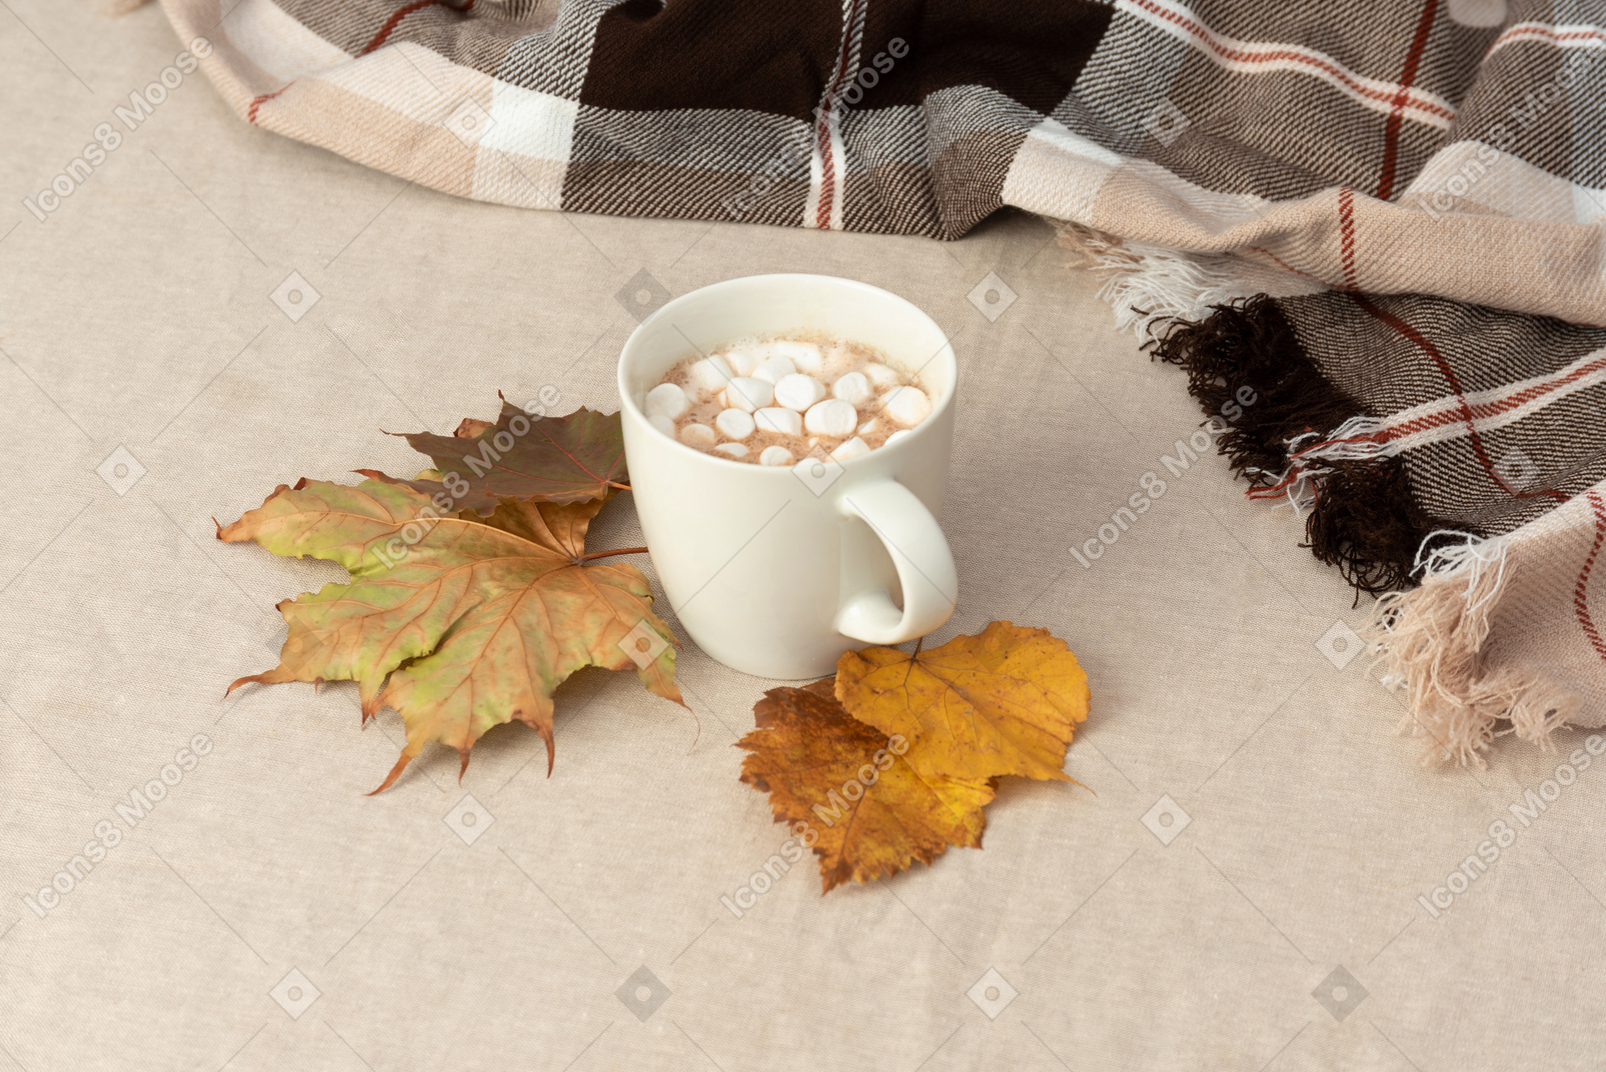 Add a book and you have a perfect autumn mood